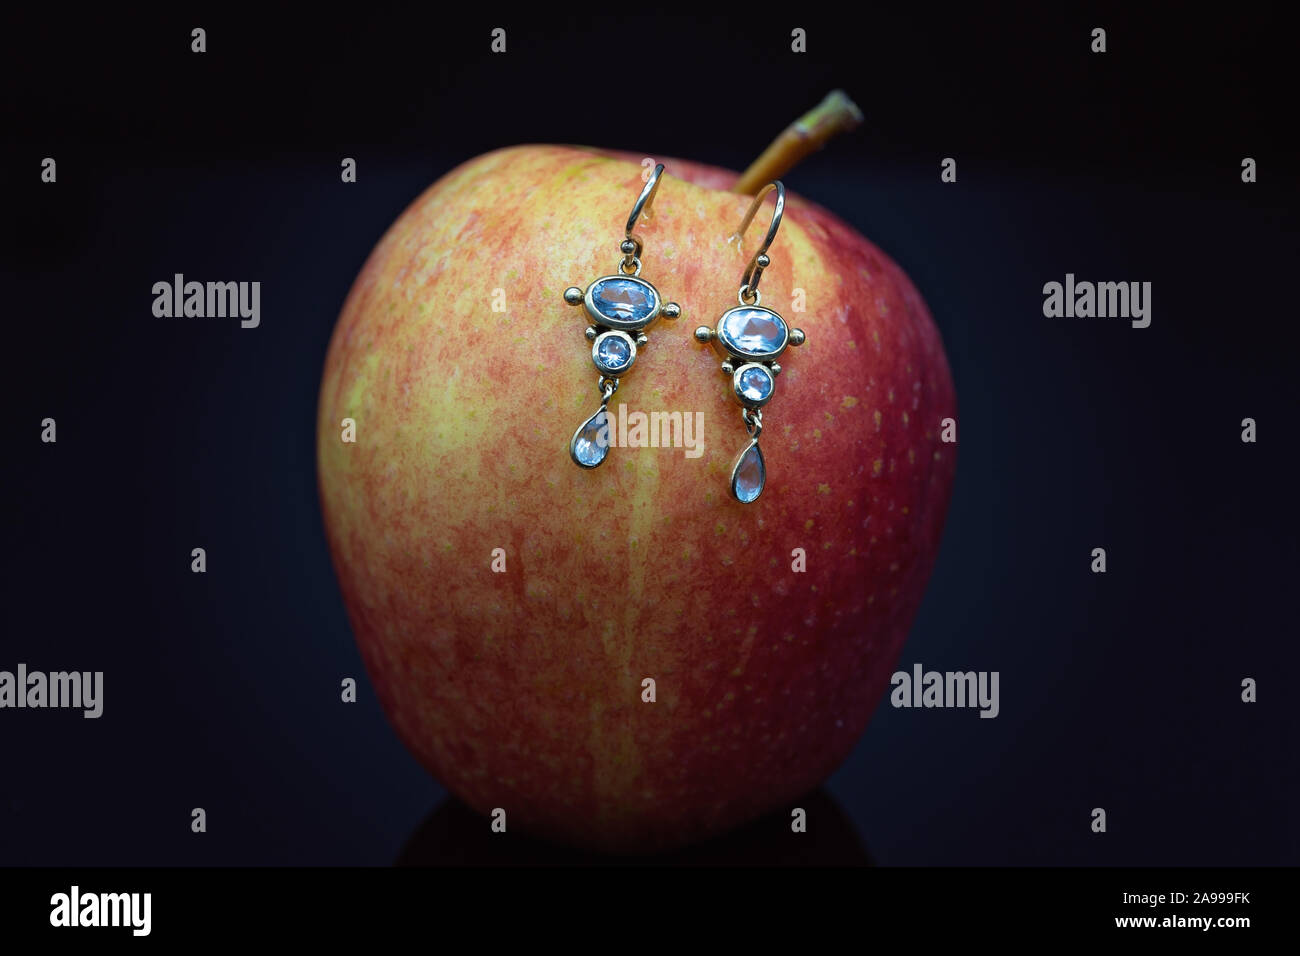 Delicate aquamarine ear-rings set in yellow gold displayed on an apple with a black background Stock Photo